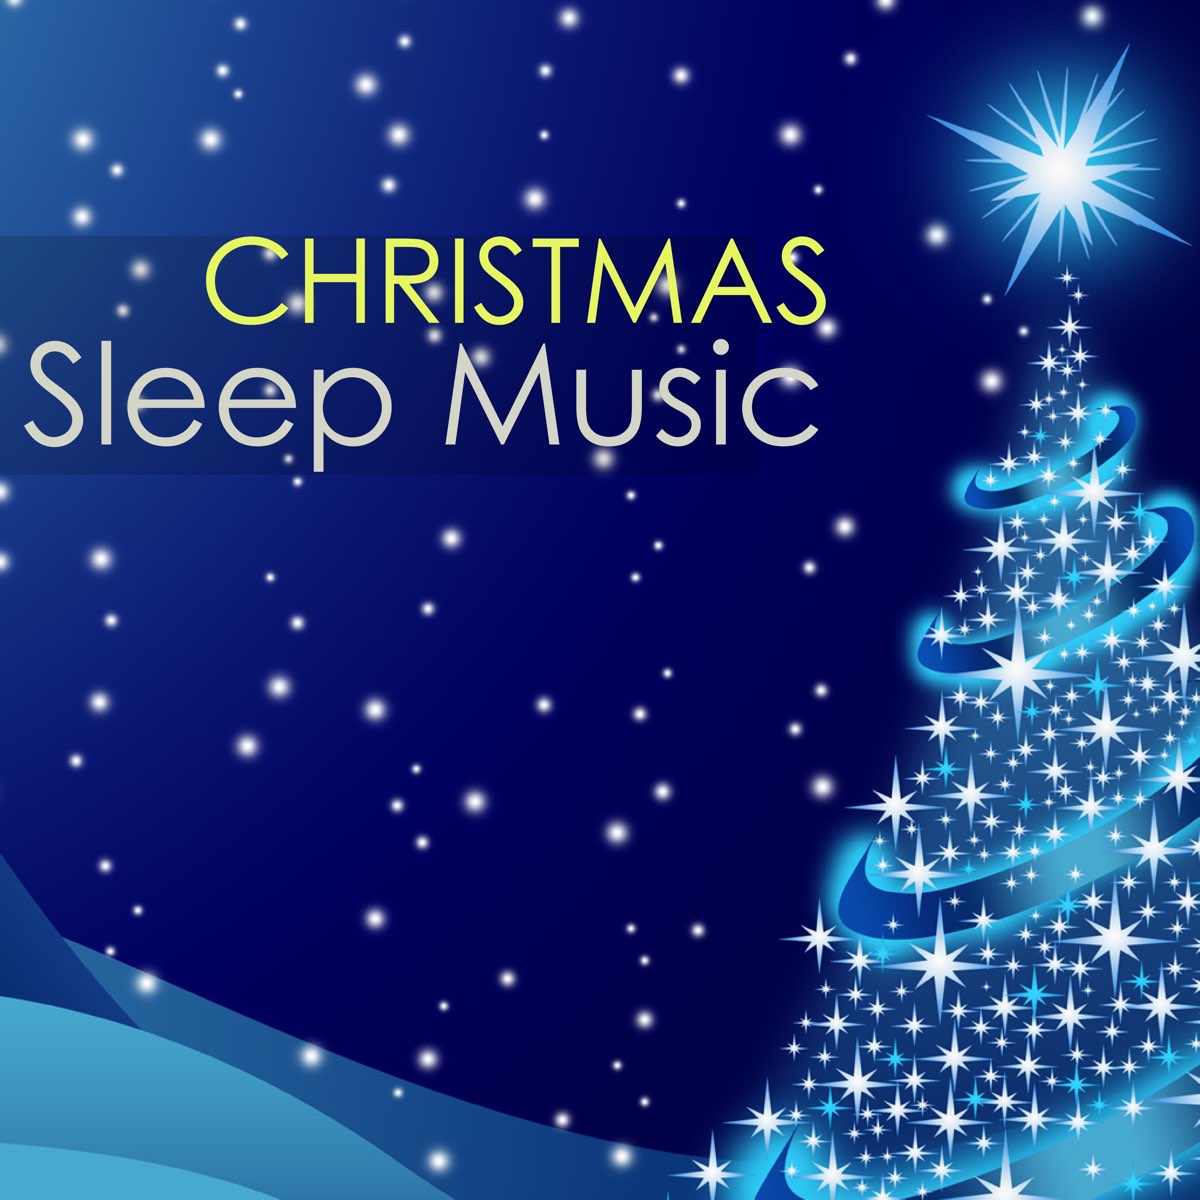 ‎Christmas Sleep Music - Relaxing Winter Sounds of Nature Traditional ...